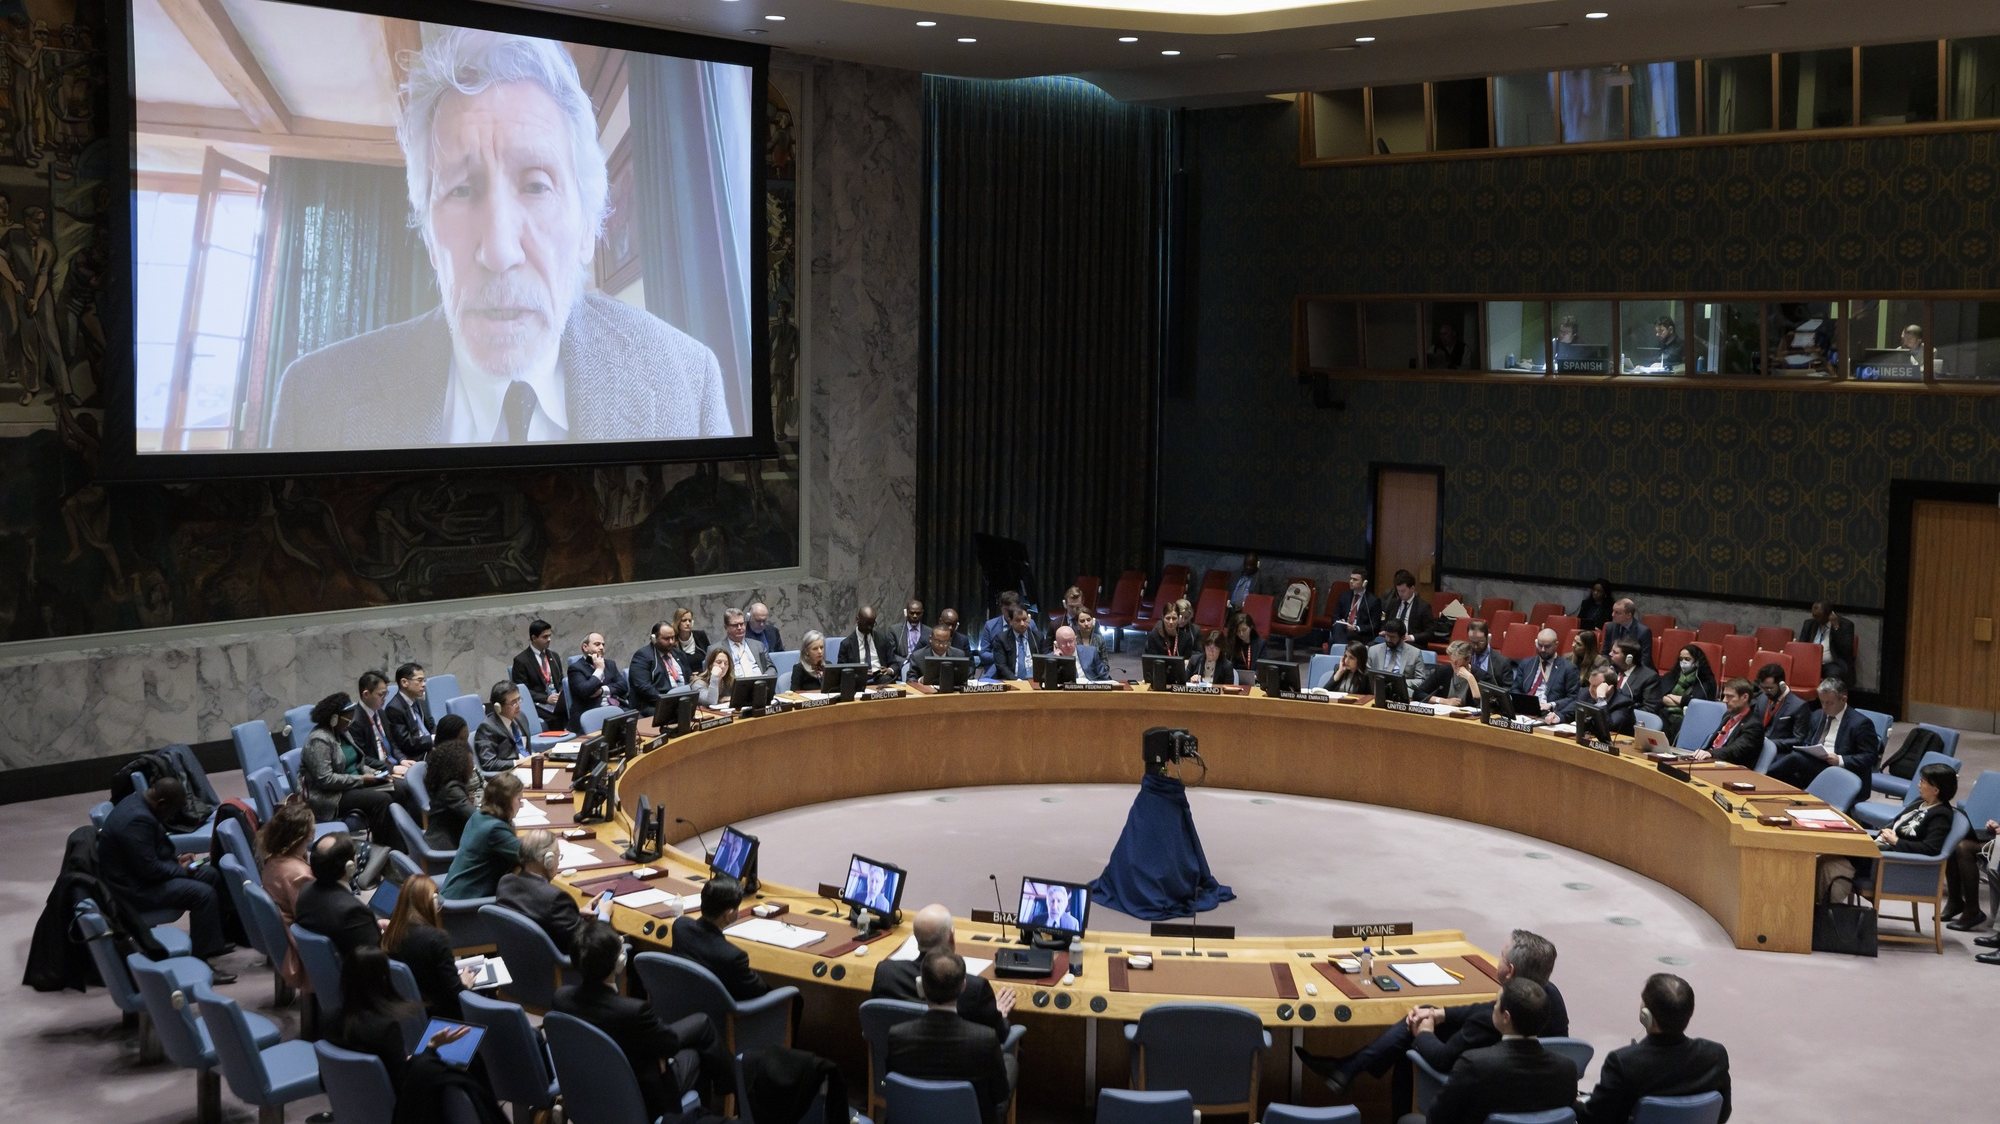 epa10454968 British musician Roger Waters delivers a speech via video to a United Nations Security Council meeting called by Russia about weapons given to Ukraine at United Nations headquarters in New York, New York, USA, 08 February 2023. Waters was invited to address the meeting by Russia, who called the meeting to address the influx of weapons to the Ukrainian military effort by Western allies.  EPA/JUSTIN LANE